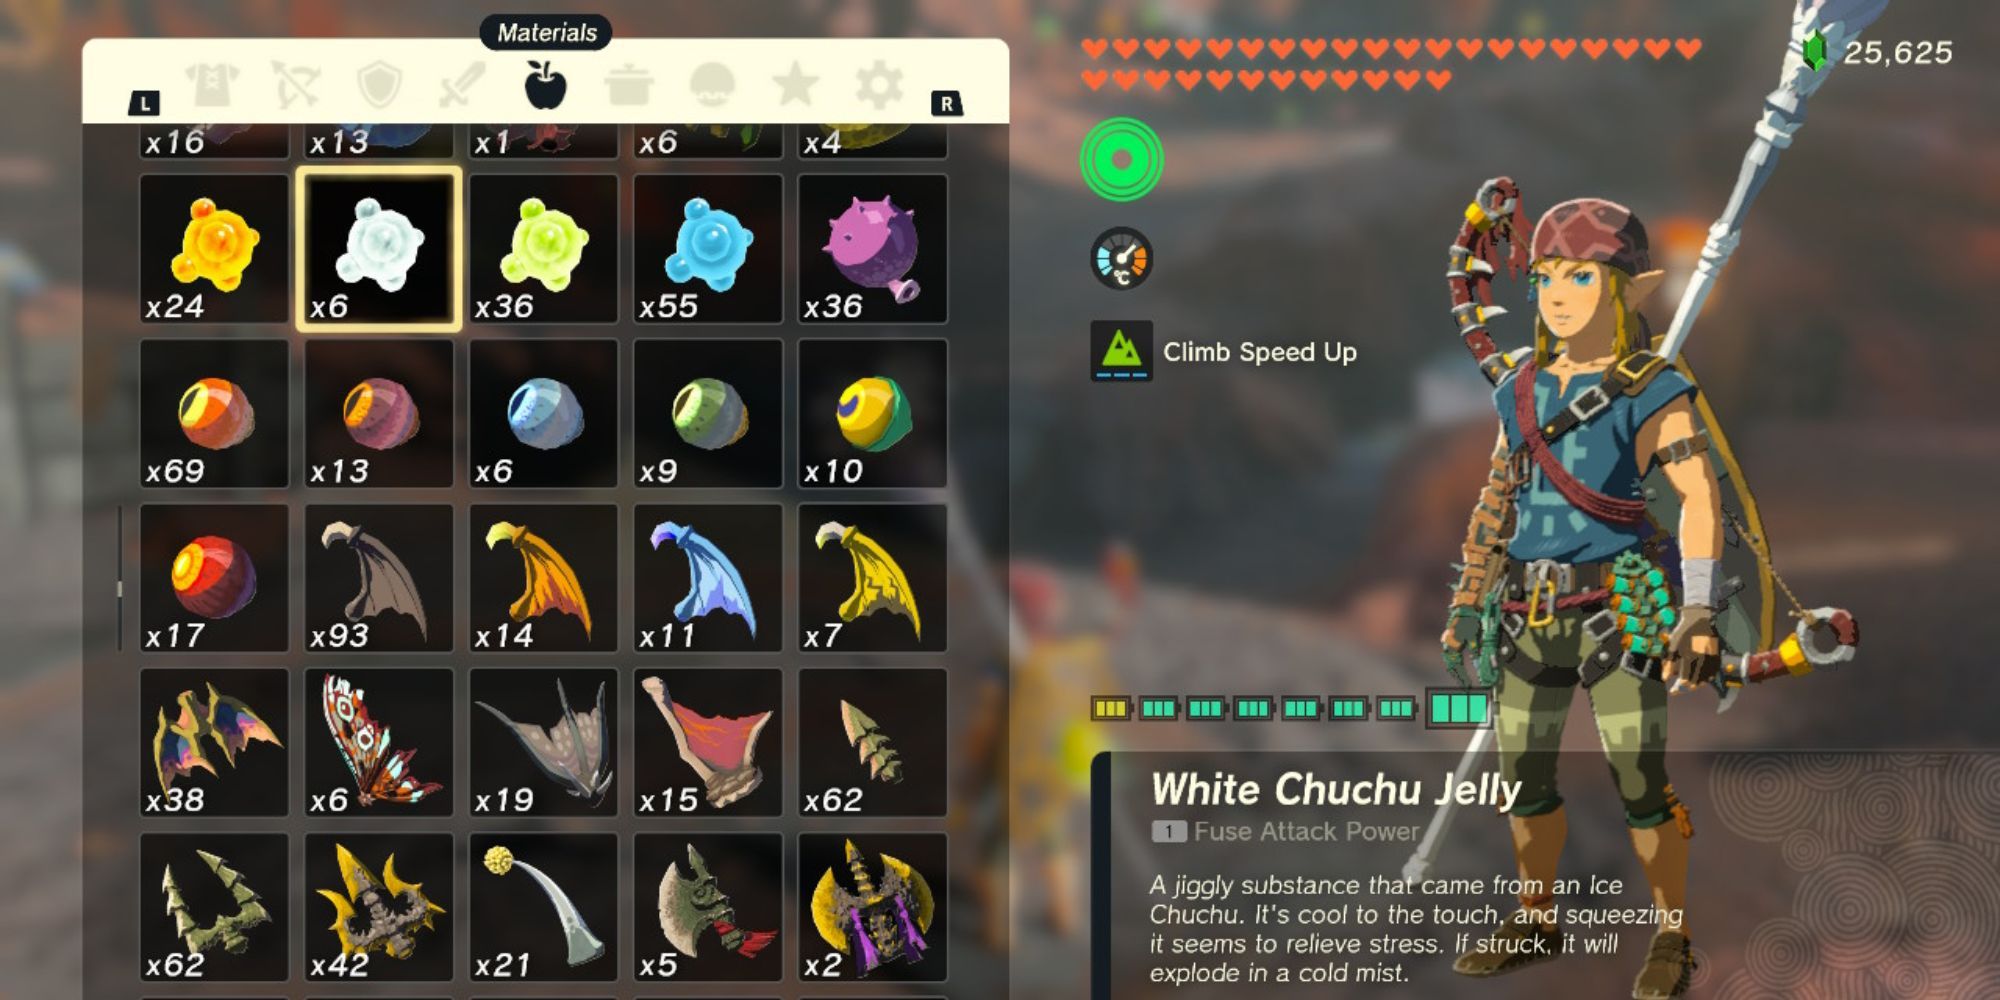 A White Chuchu Jelly in Link's inventory